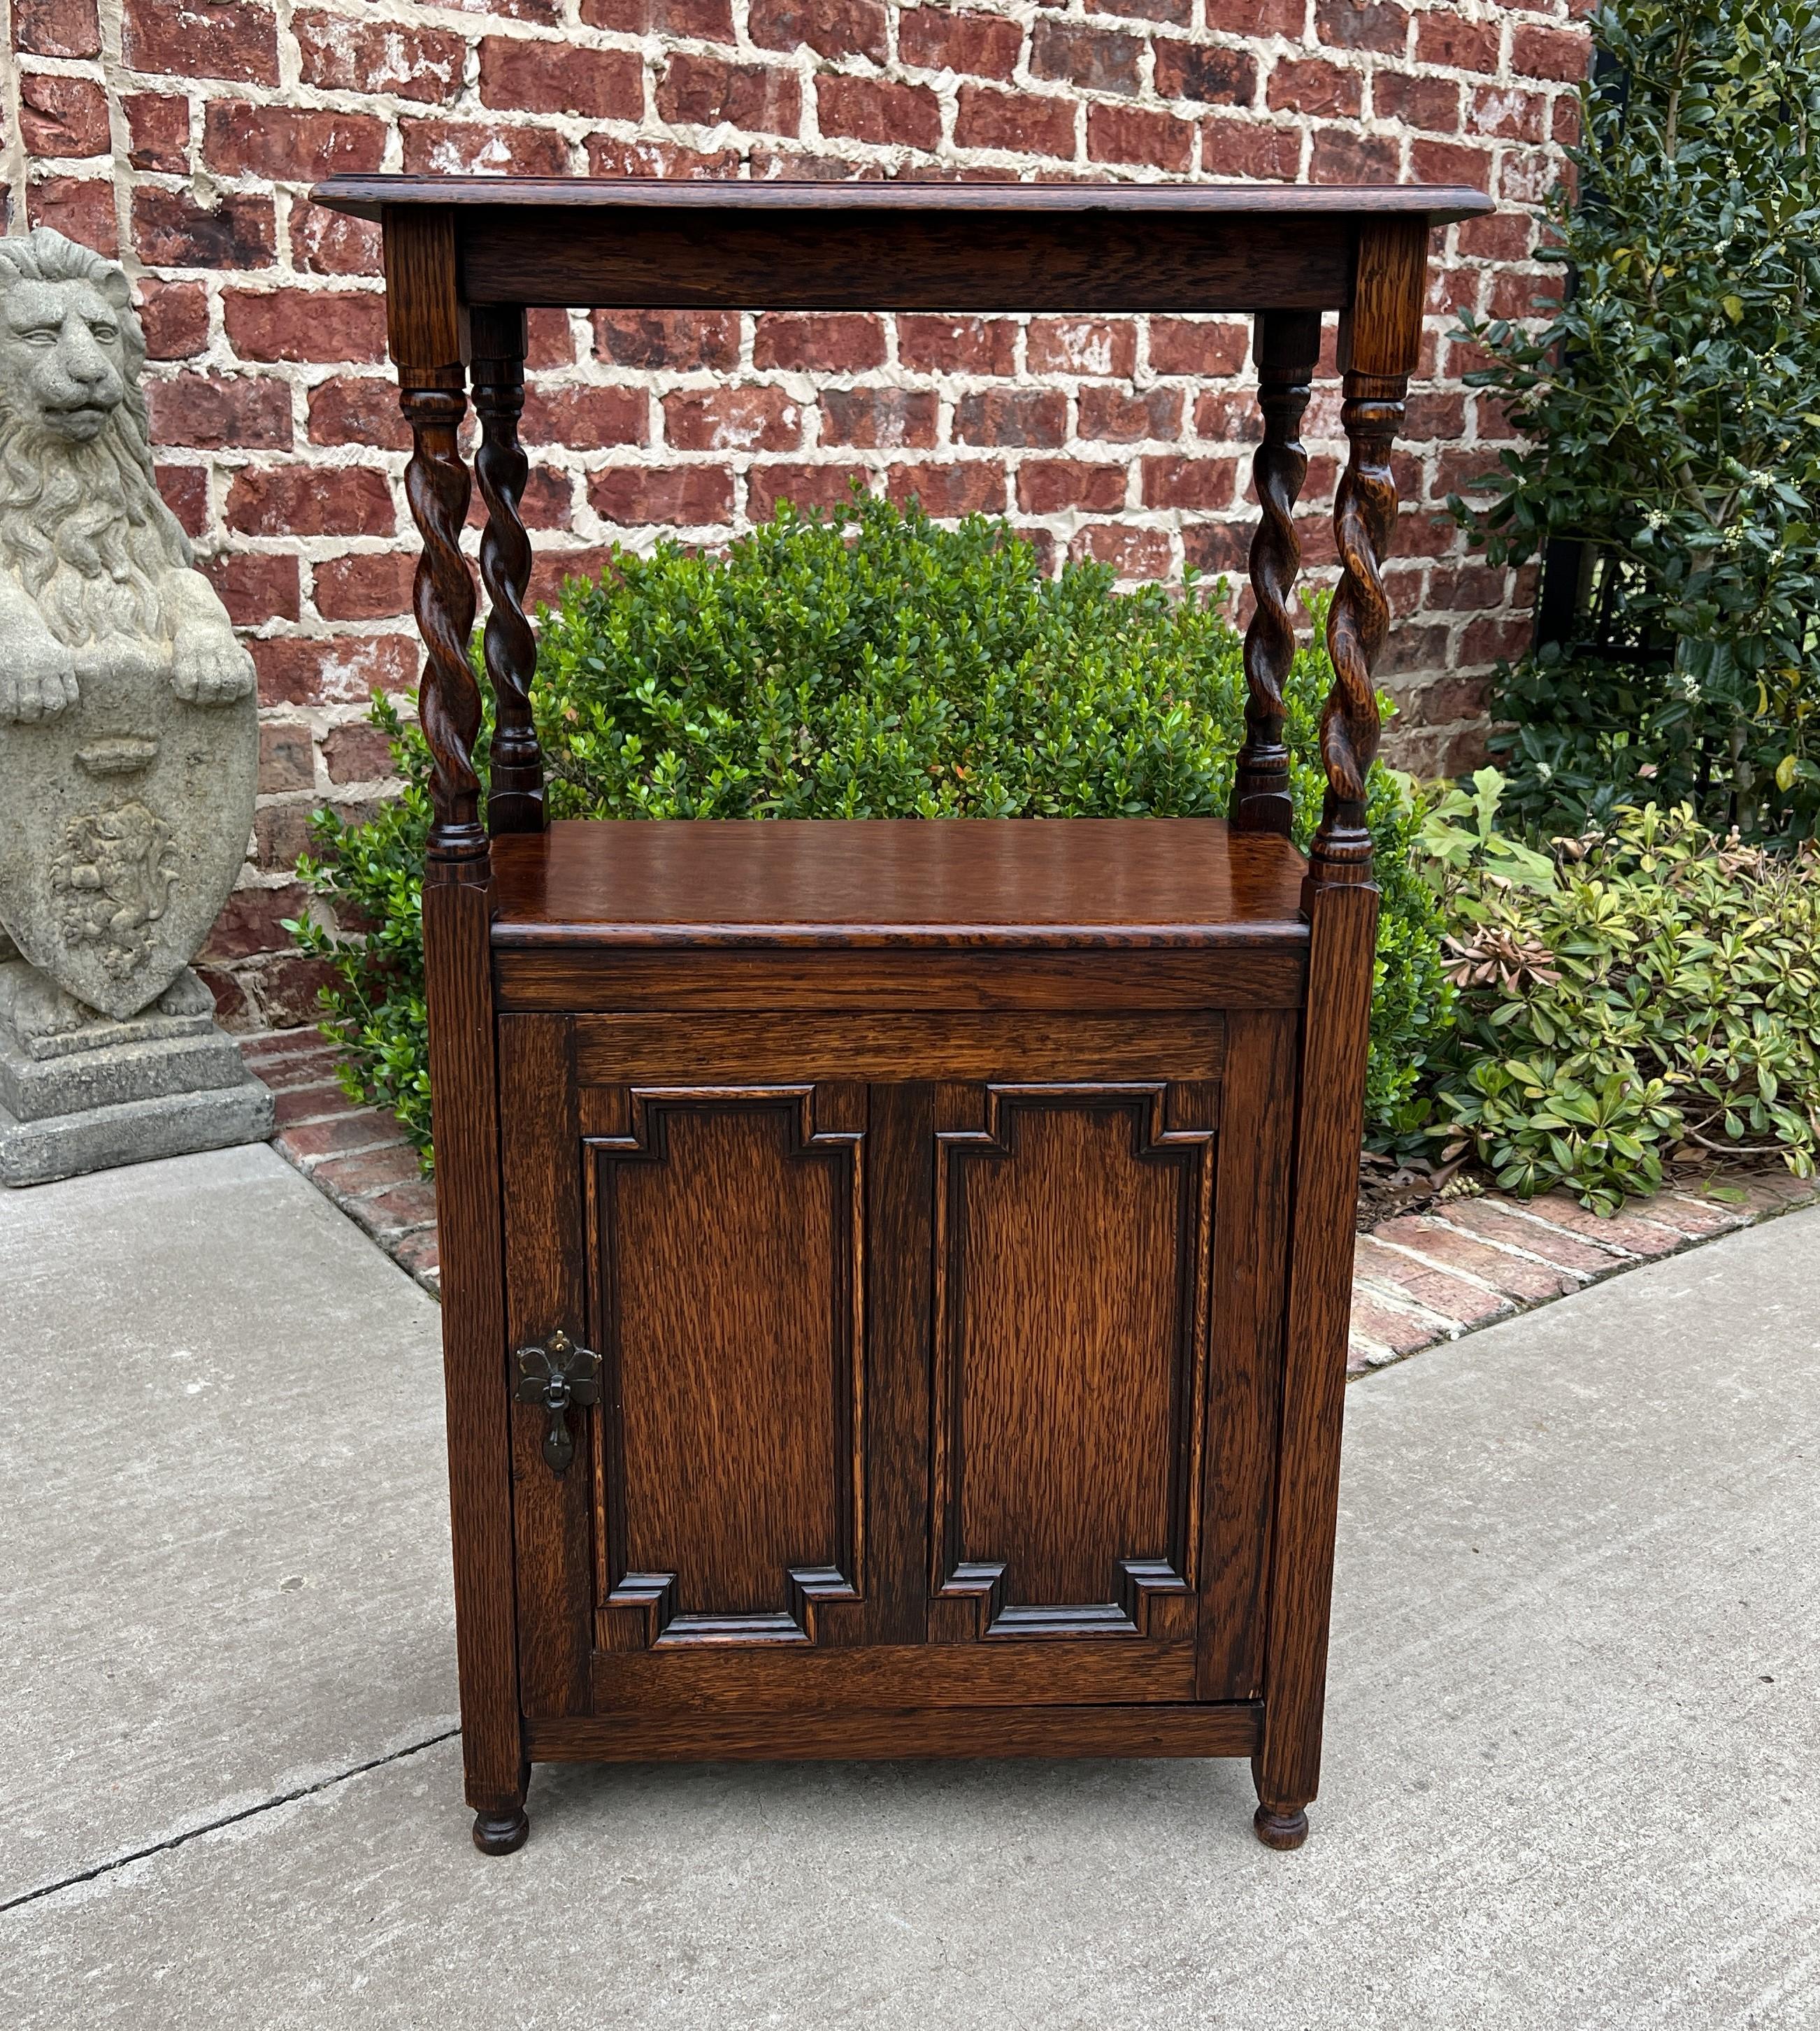 Charming and rare antique english oak barley twist end table cabinet with revolving magazine book rack~~circa 1920s.

 Versatile size~~fits in small spaces
 33.5